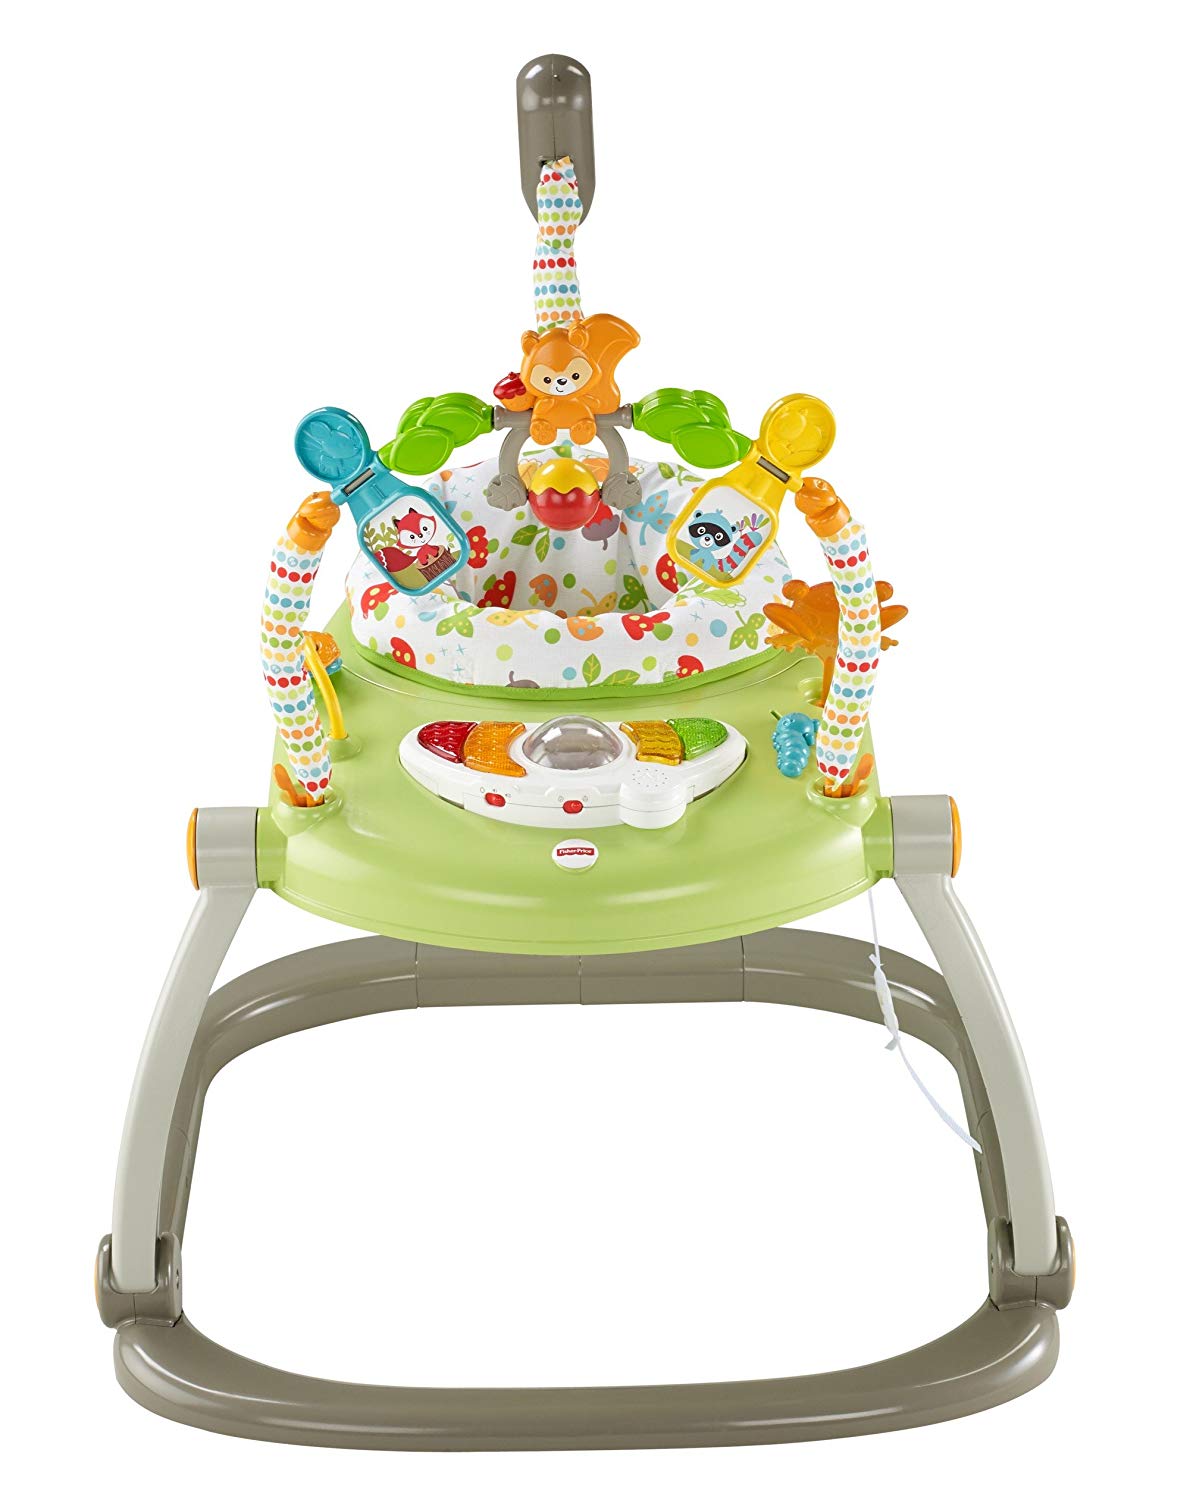 Fisher-Price Woodland Friends Spacesaver Jumpe Roo by Fisher-Price